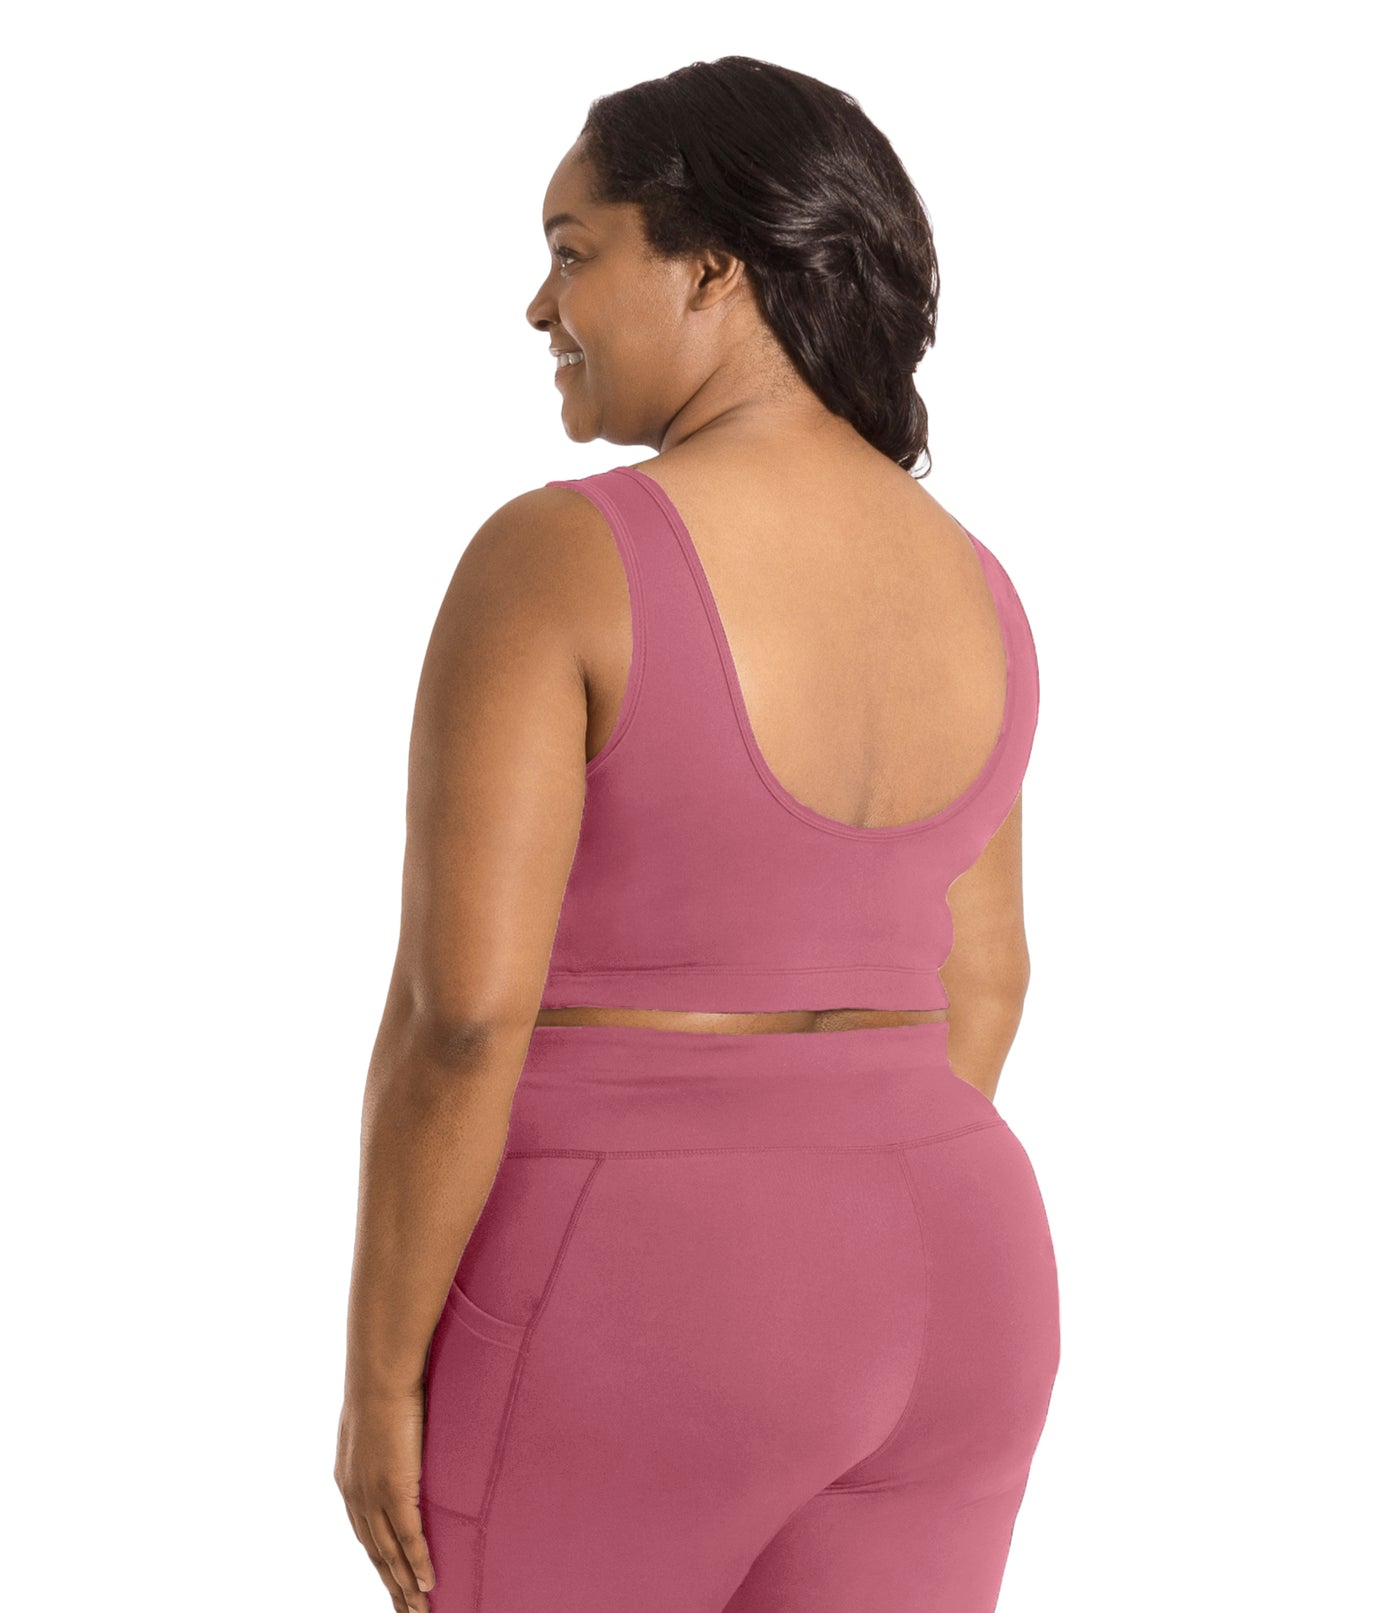 Plus size woman, facing back, wearing JunoActive plus size JunoStretch Scoop Bra in mauve. The woman is wearing black plus size JunoActive leggings. Her arms fall naturally to her side with her hands on her thighs.